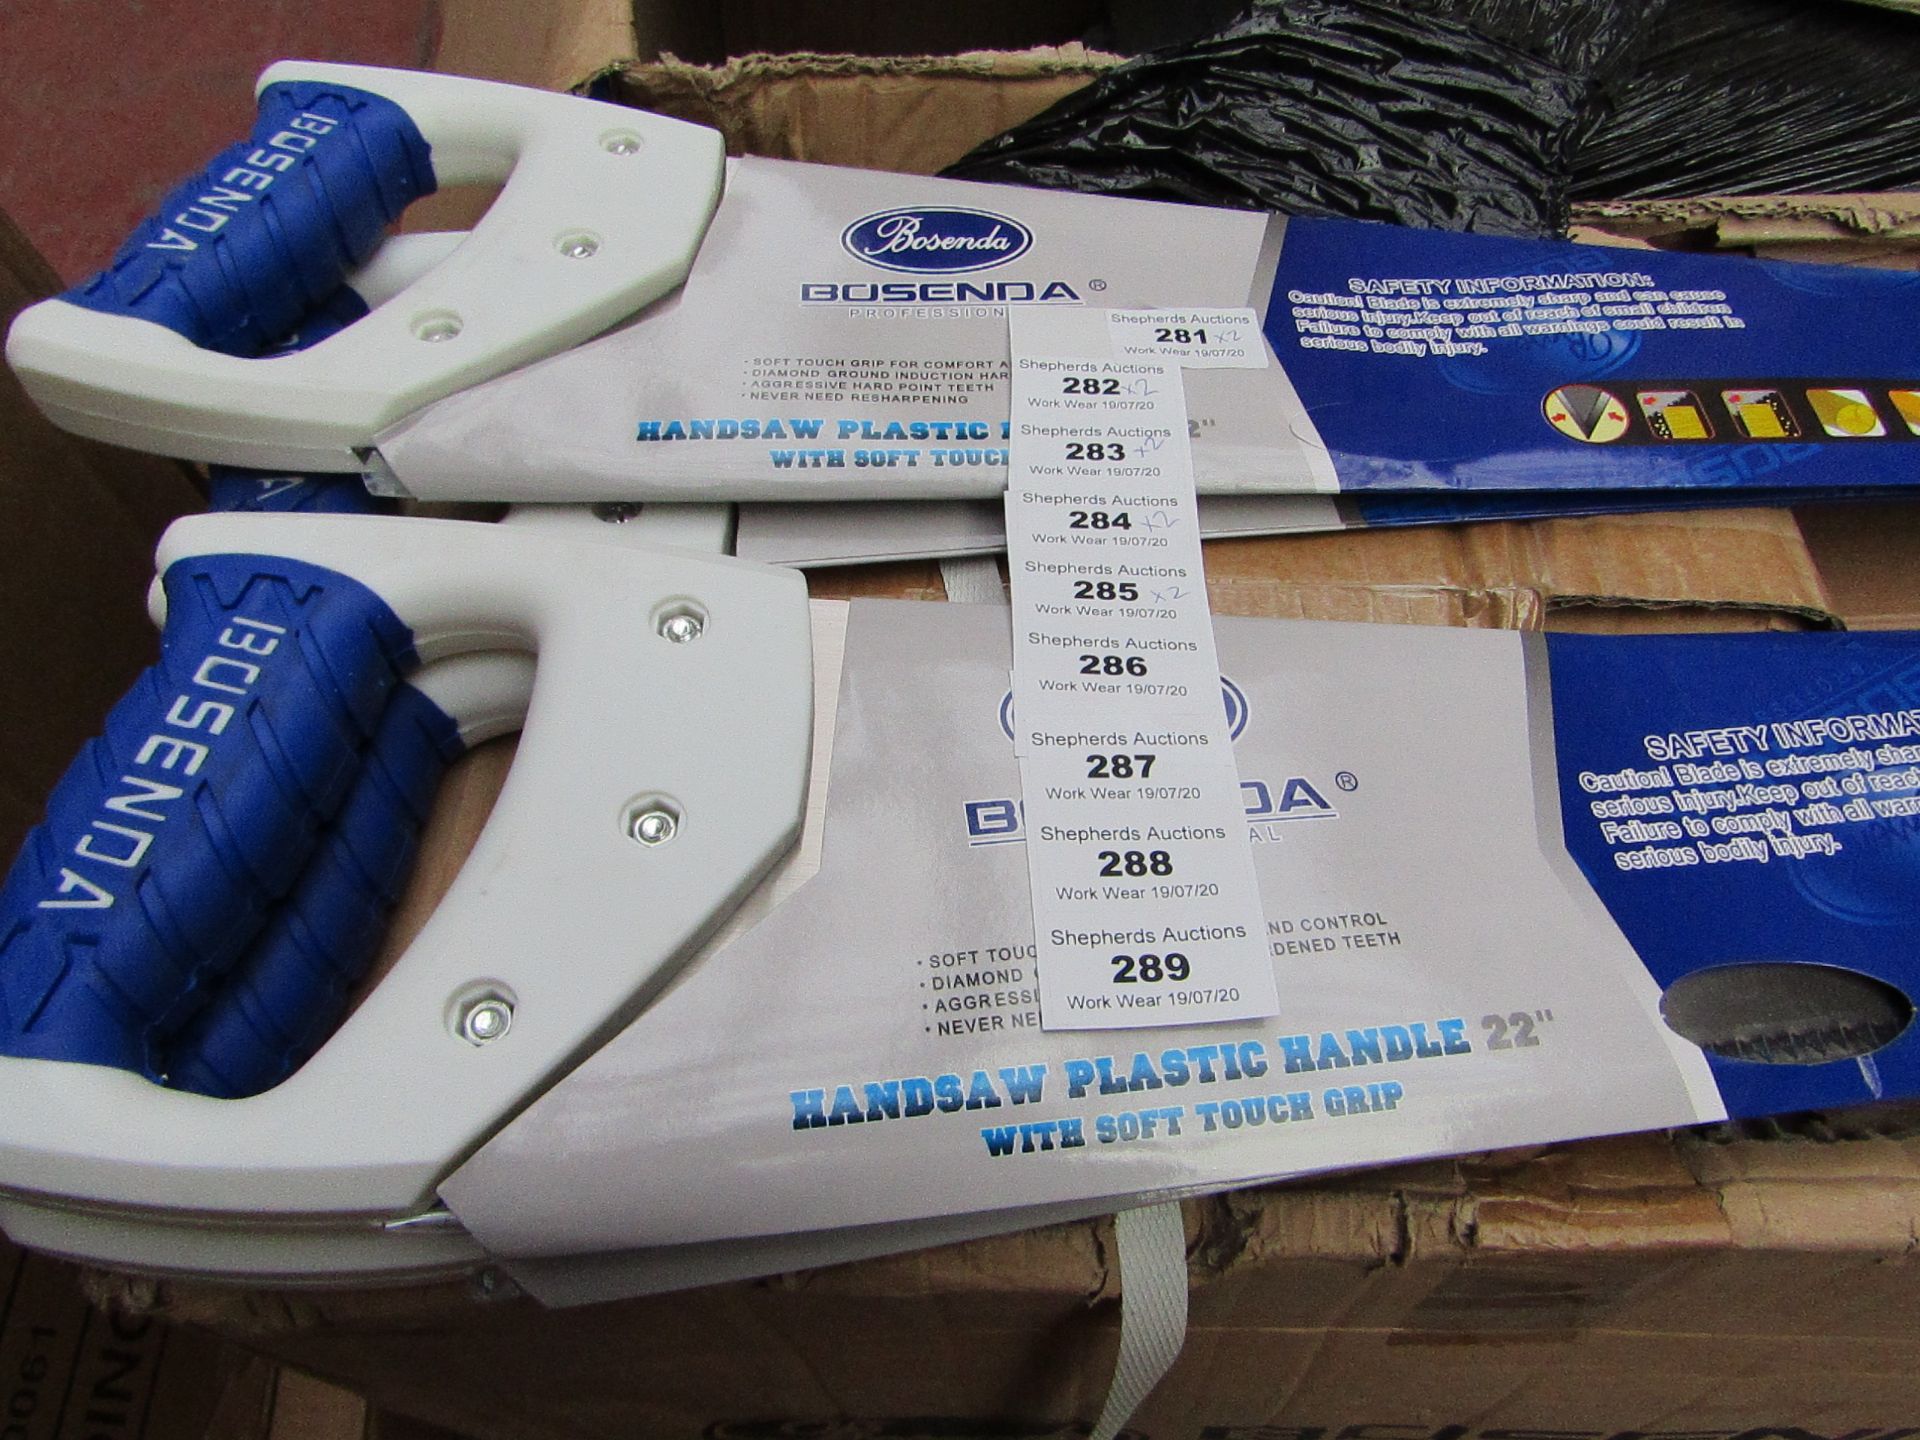 Bosenda - Handsaw plastic handle 22" - New and Packaged.